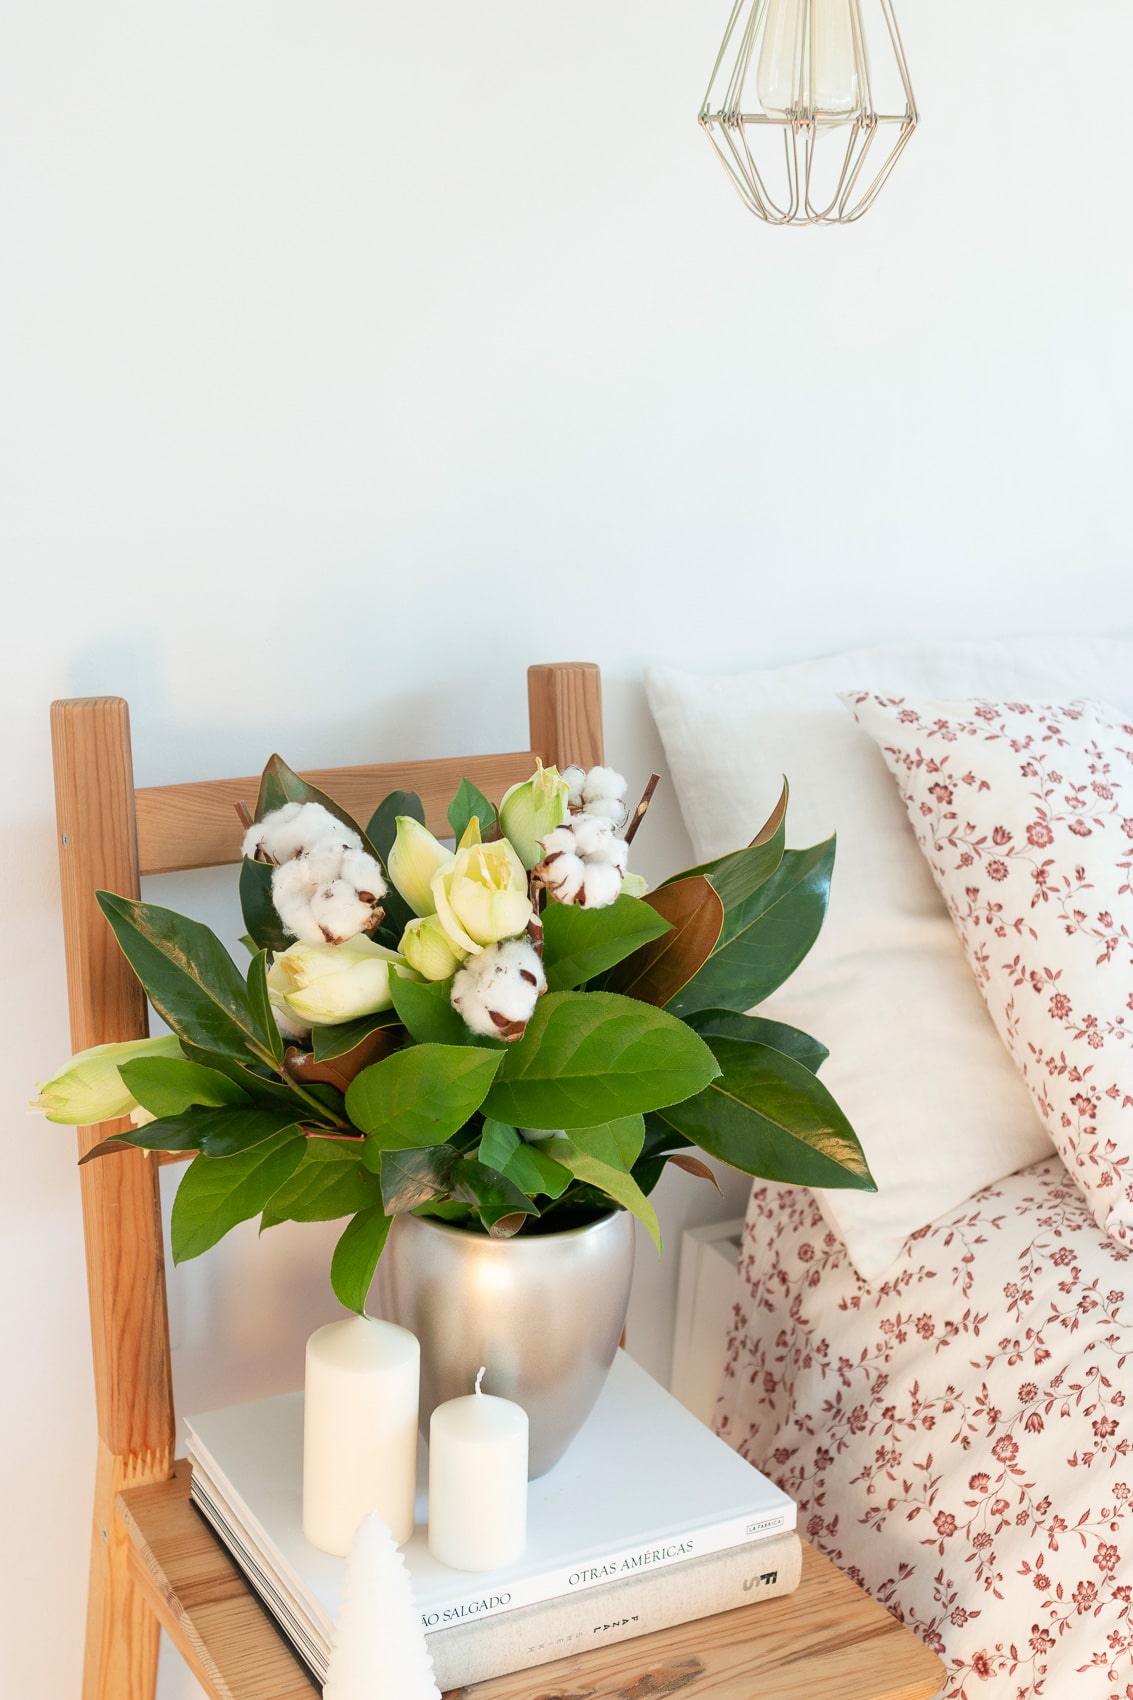 White bouquet of cotton flowers and amaryllis